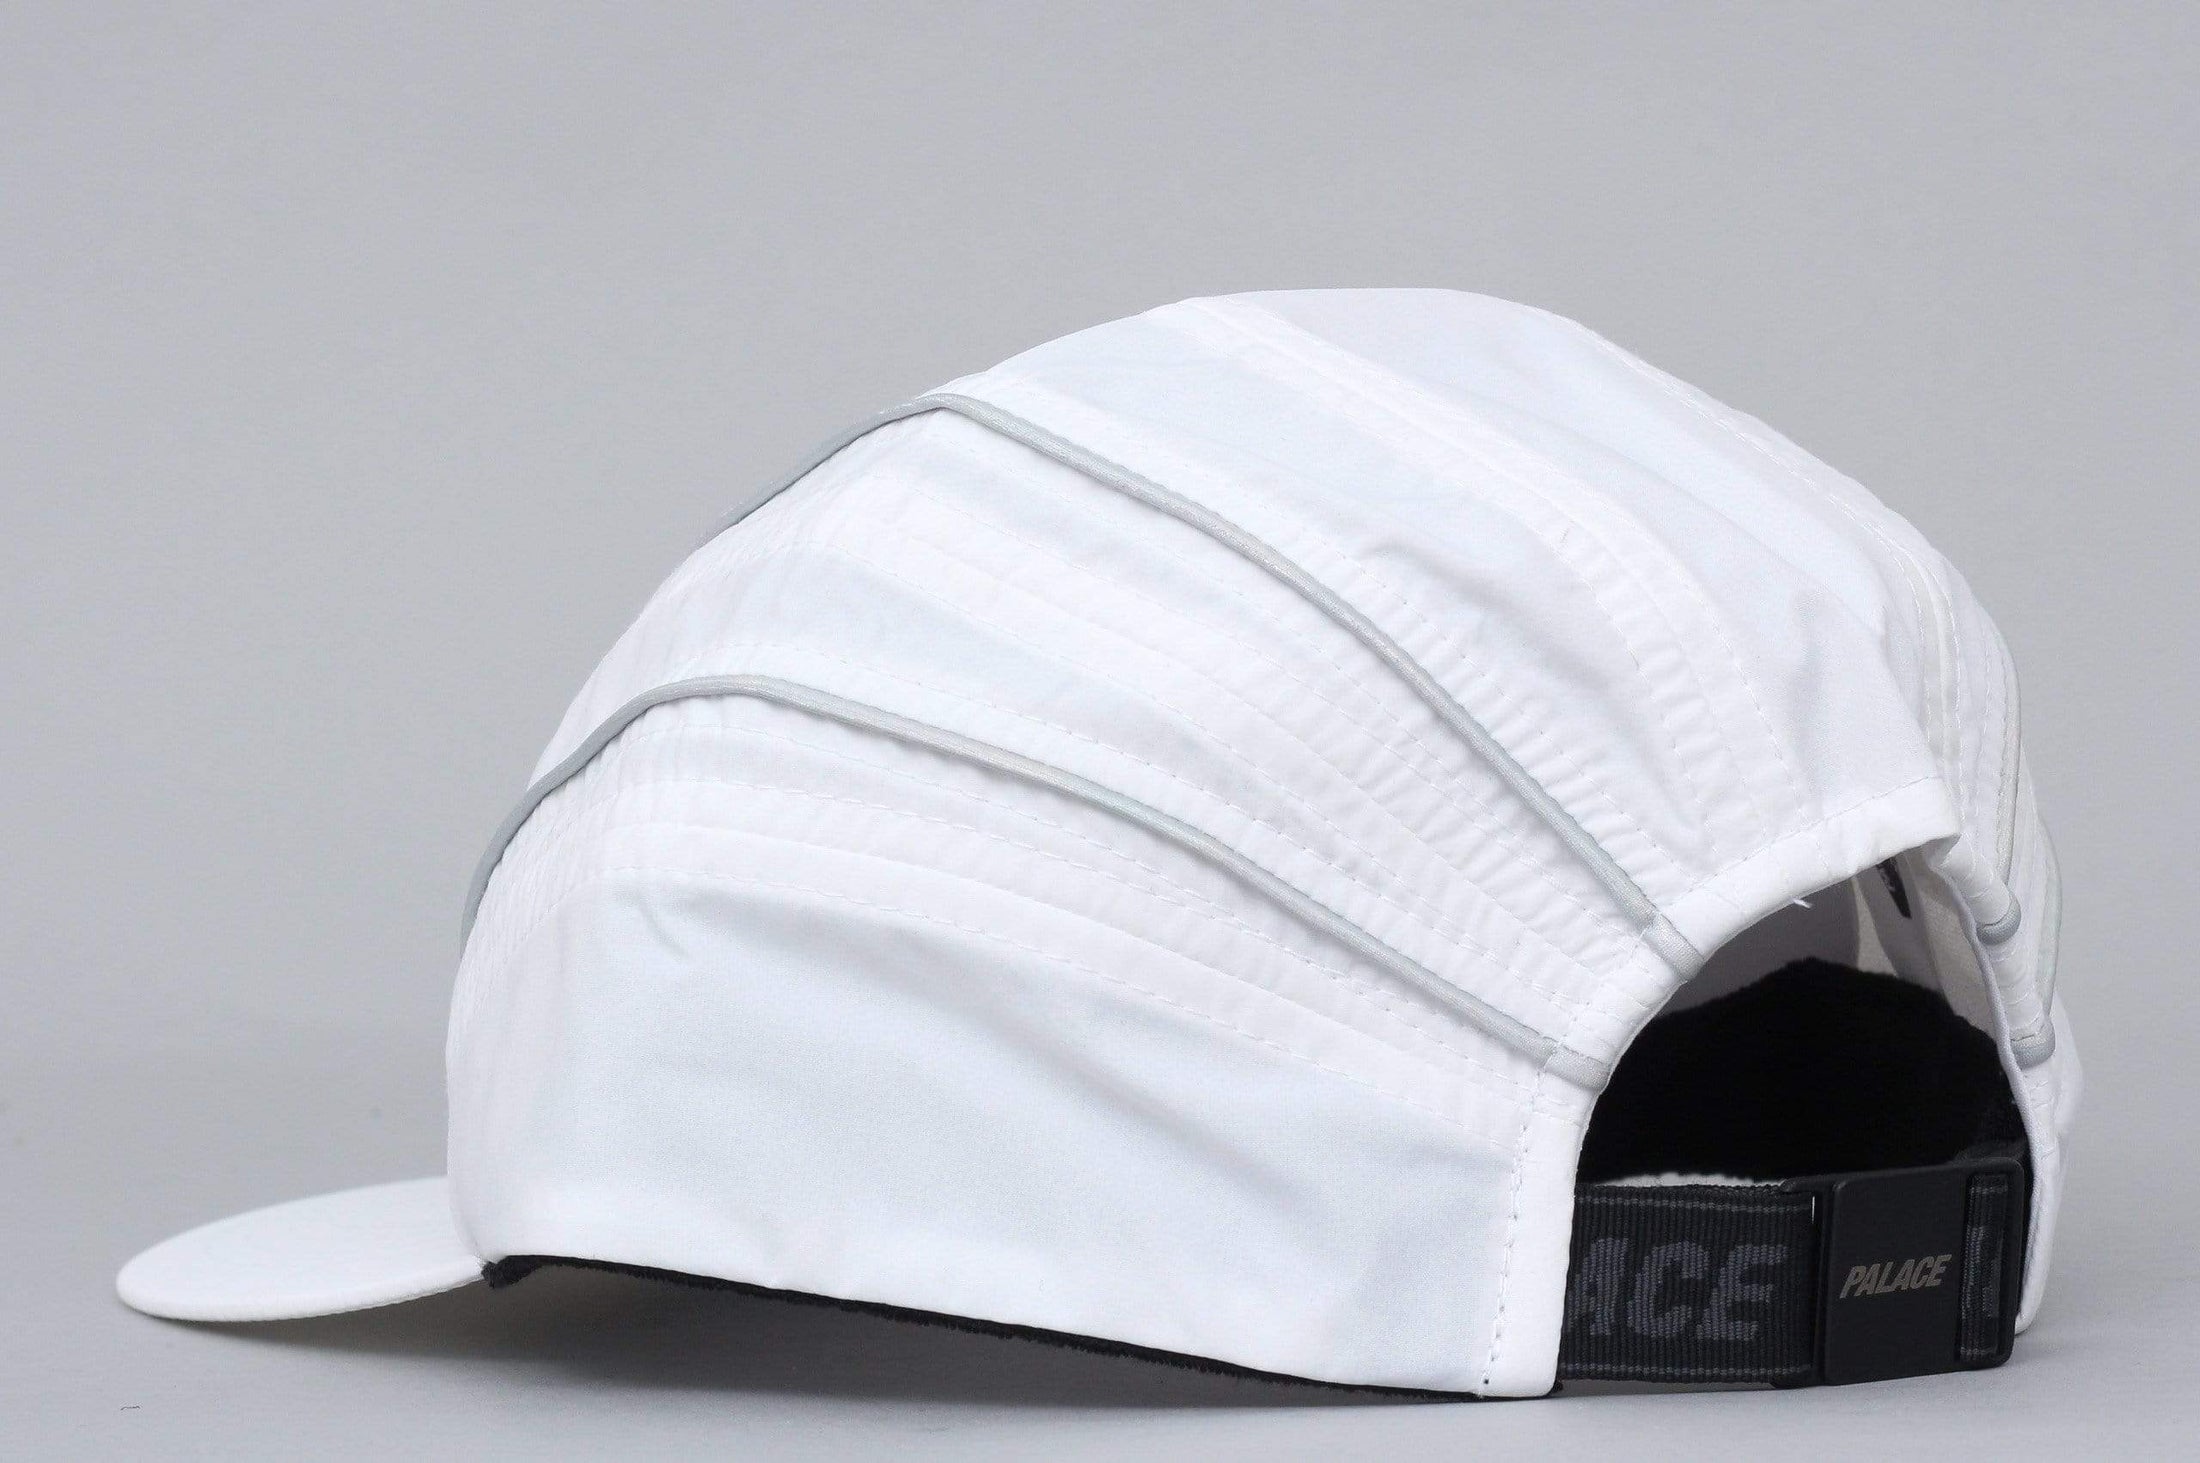 Palace S-Runner Shell Hat White / Pearl